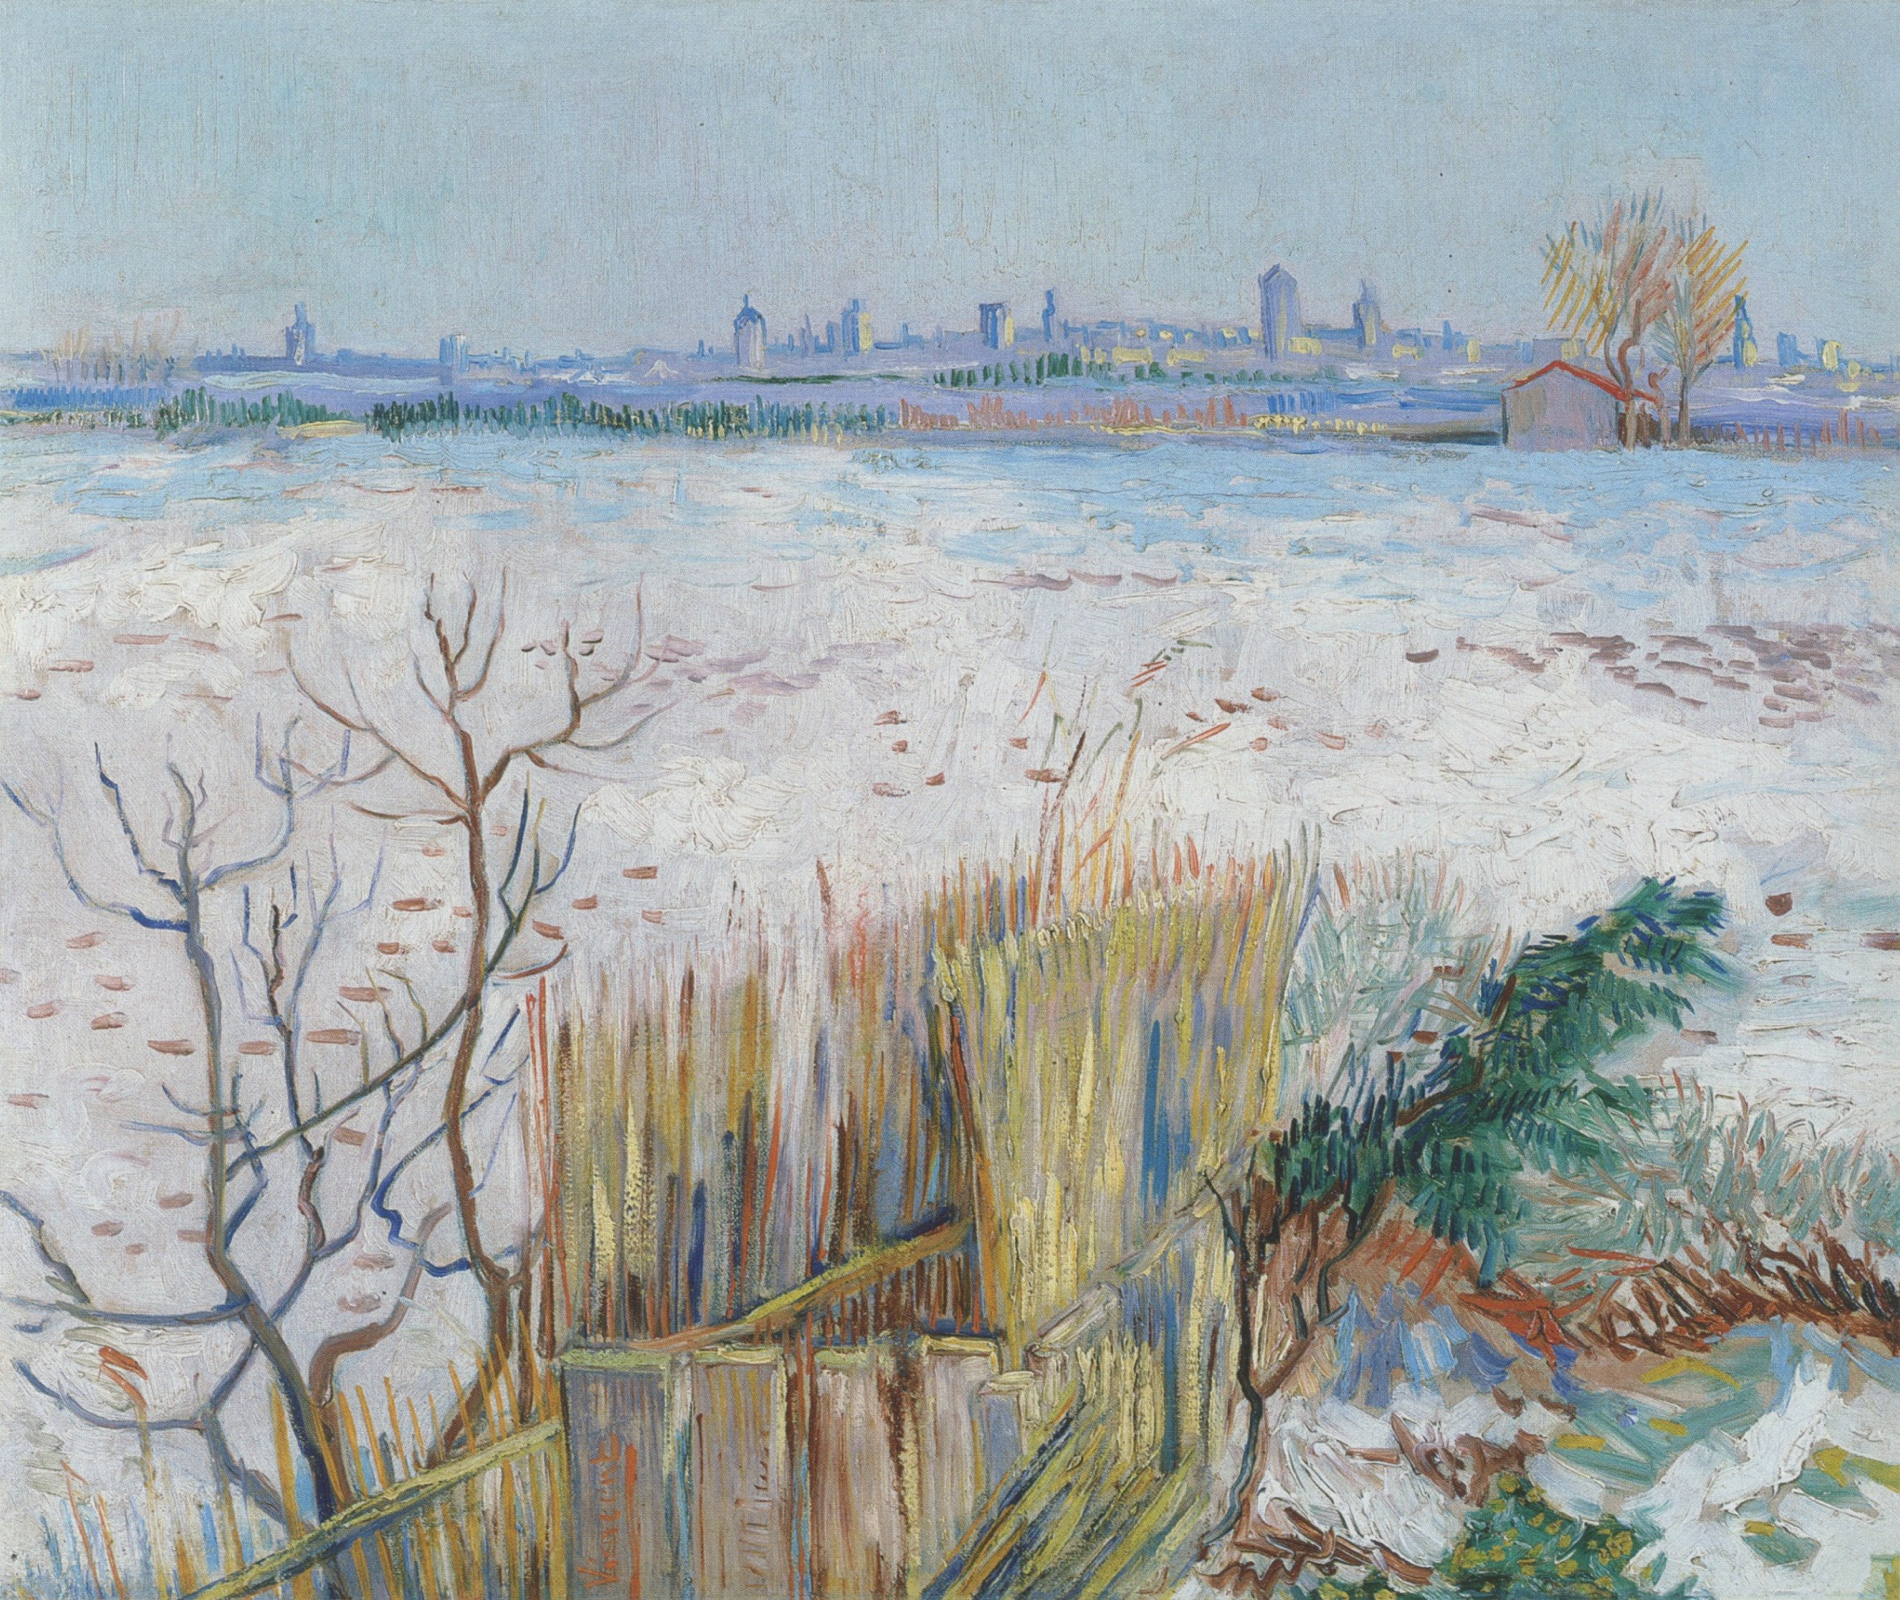 Snowy Landscape with Arles in the Background by Vincent van Gogh - 1888 - 50 x 60 cm private collection